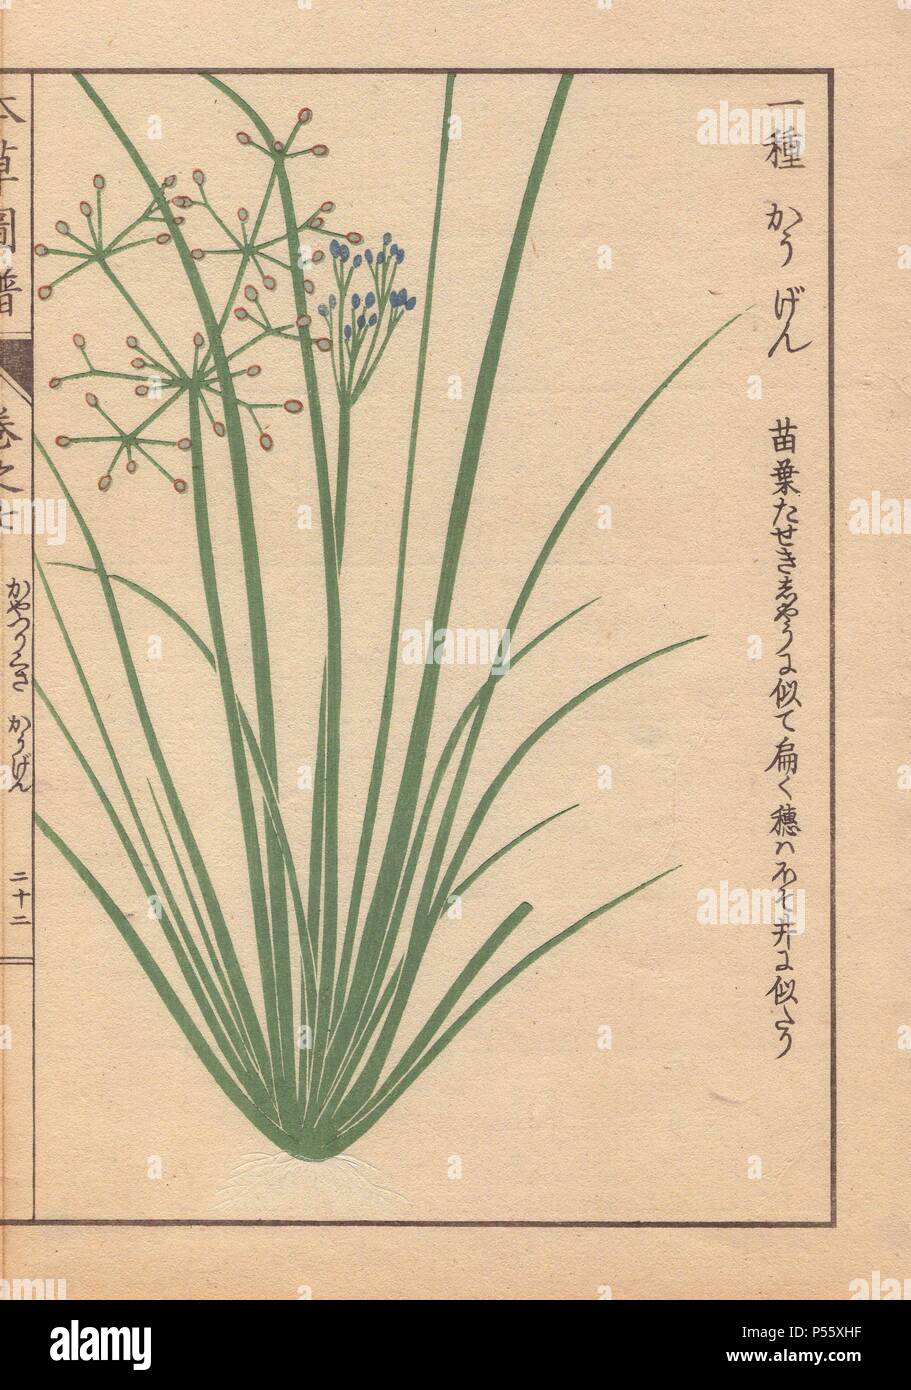 Blue-flowered grasslike fimbry or globe fringerush, Fimbristylis miliacea Vahl.. Colour-printed woodblock engraving by Kan'en Iwasaki from 'Honzo Zufu,' an Illustrated Guide to Medicinal Plants, 1884. Iwasaki (1786-1842) was a Japanese botanist, entomologist and zoologist. He was one of the first Japanese botanists to incorporate western knowledge into his studies. Stock Photo